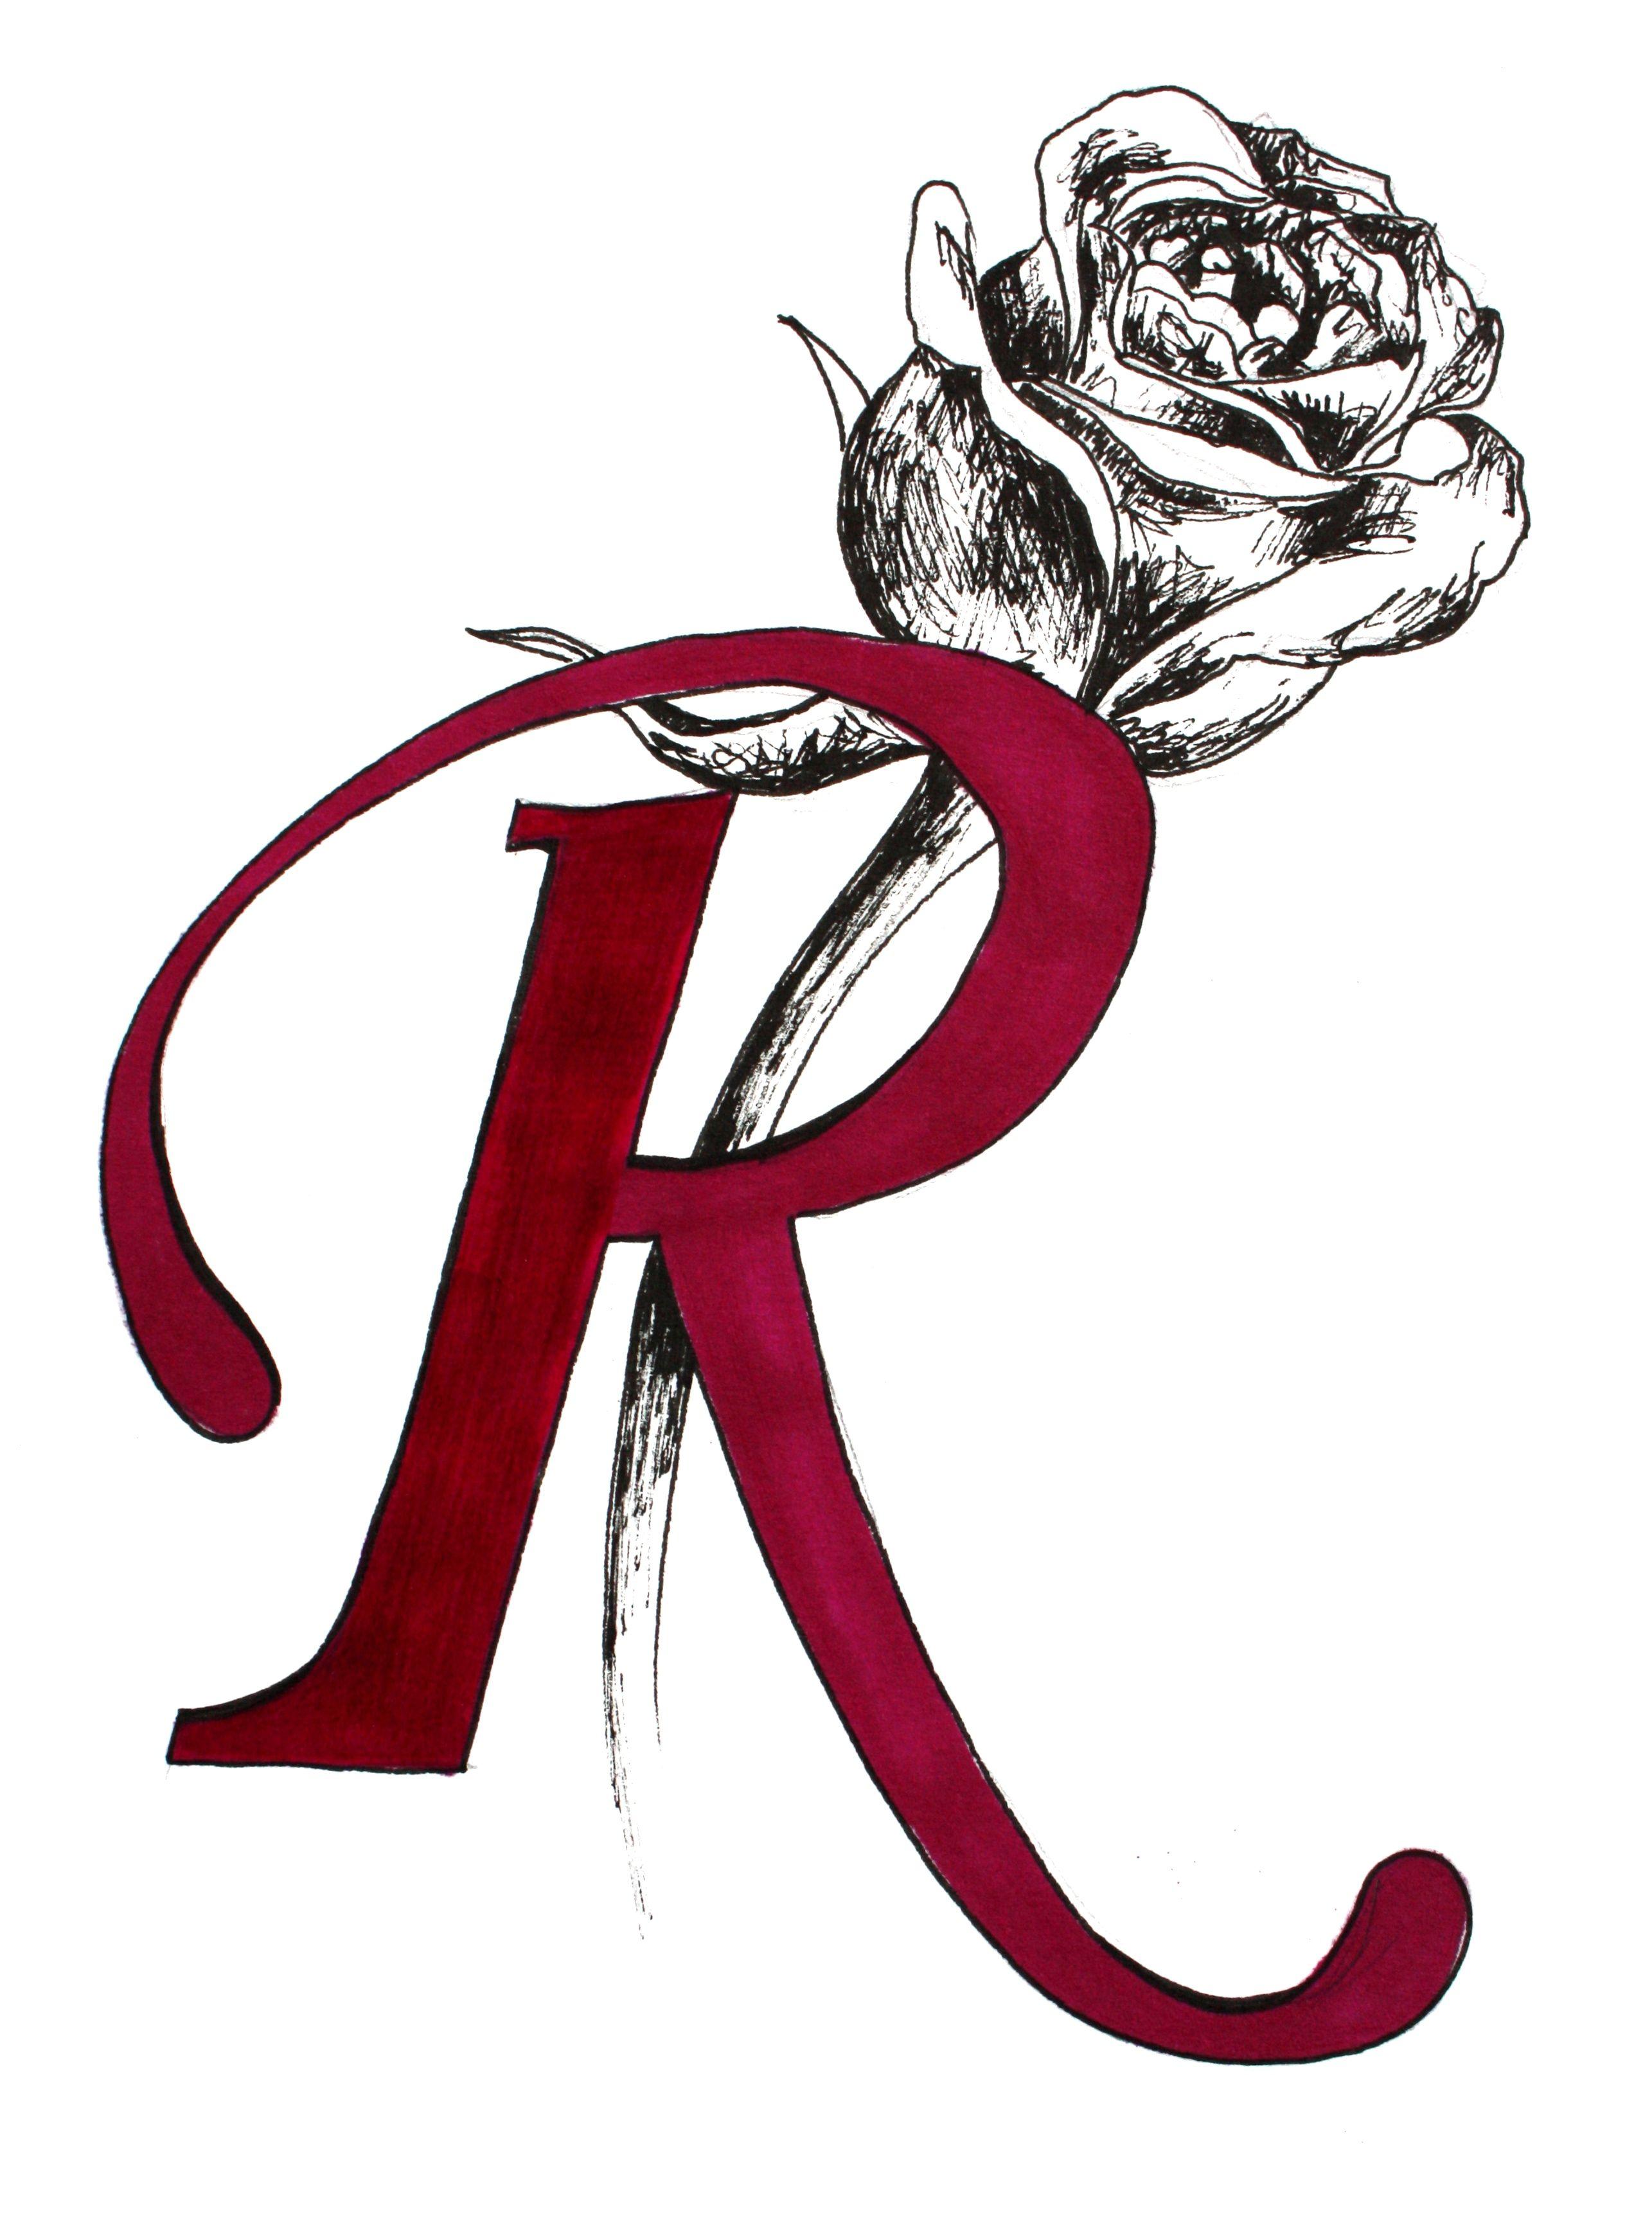 r and s letter wallpaper